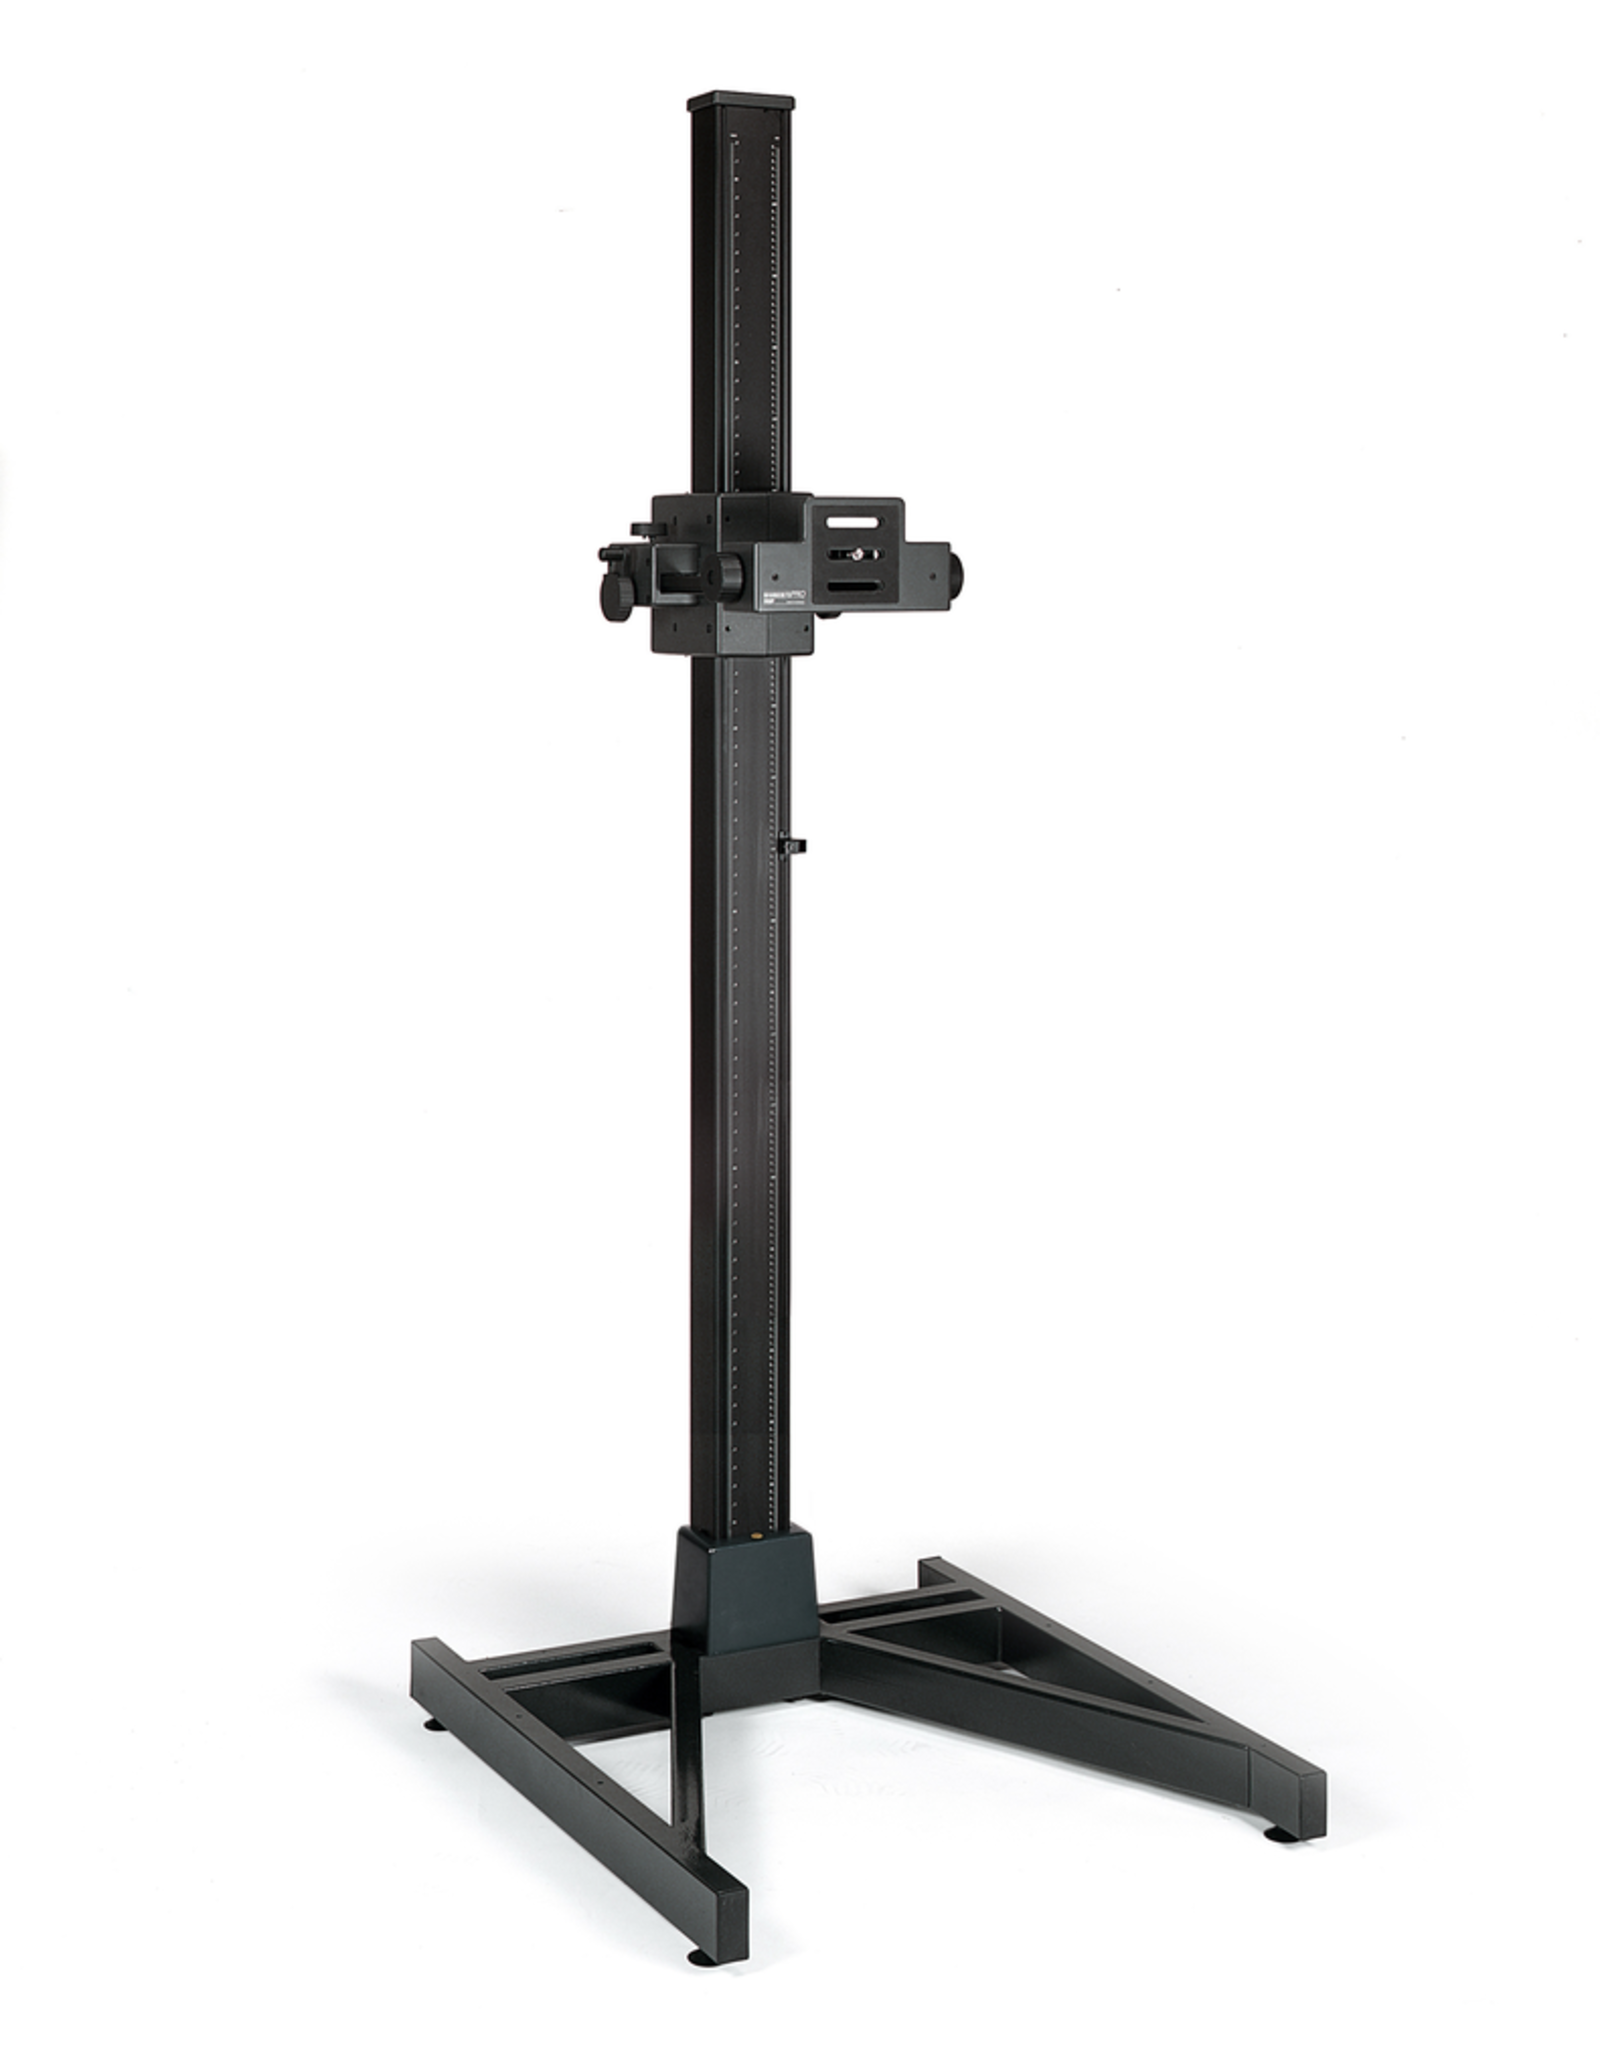 Kaiser Kaiser RSP Xtra Copy Stand,  camera carrier with motorized height adjustment. Total height: 227 cm (89.4 in.)